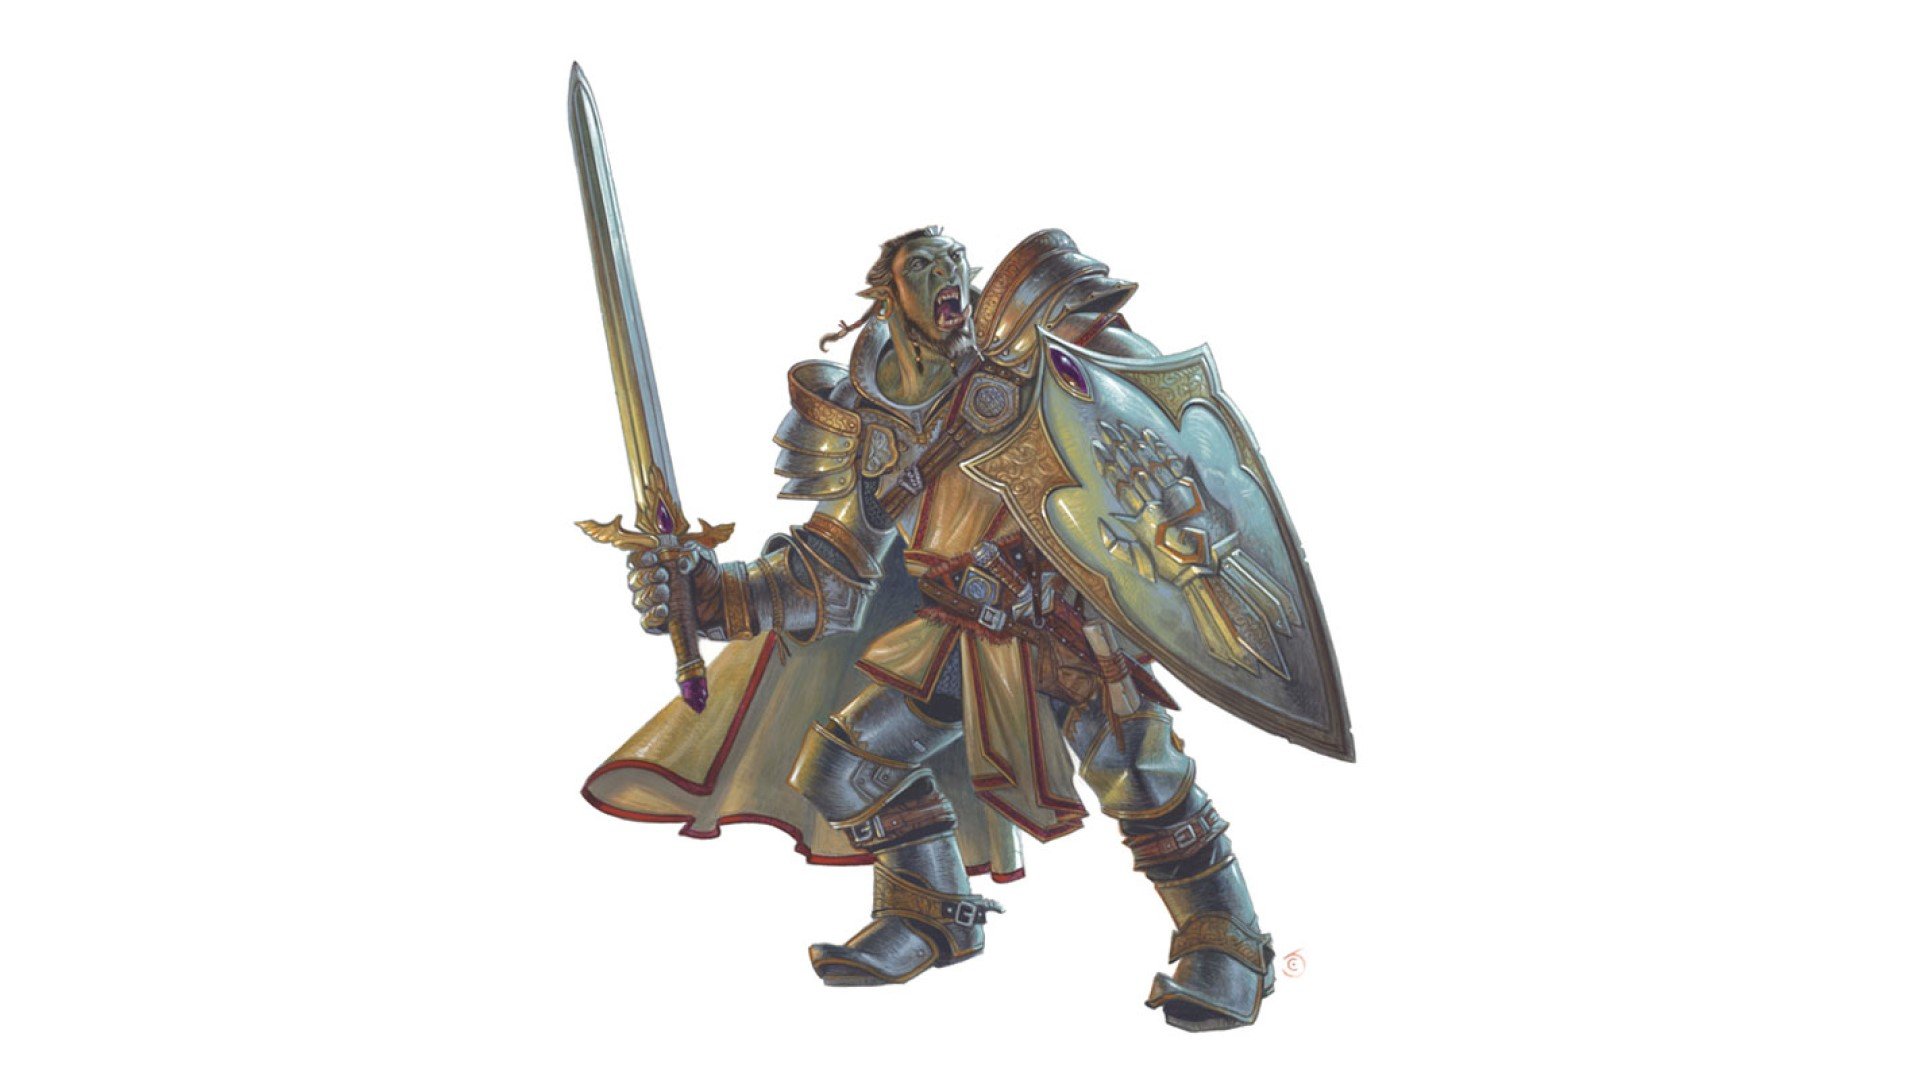 DnD Barbarian 5E class guide - Wizards of the Coast artwork showing a half-orc wearing full plat with a sword and shield